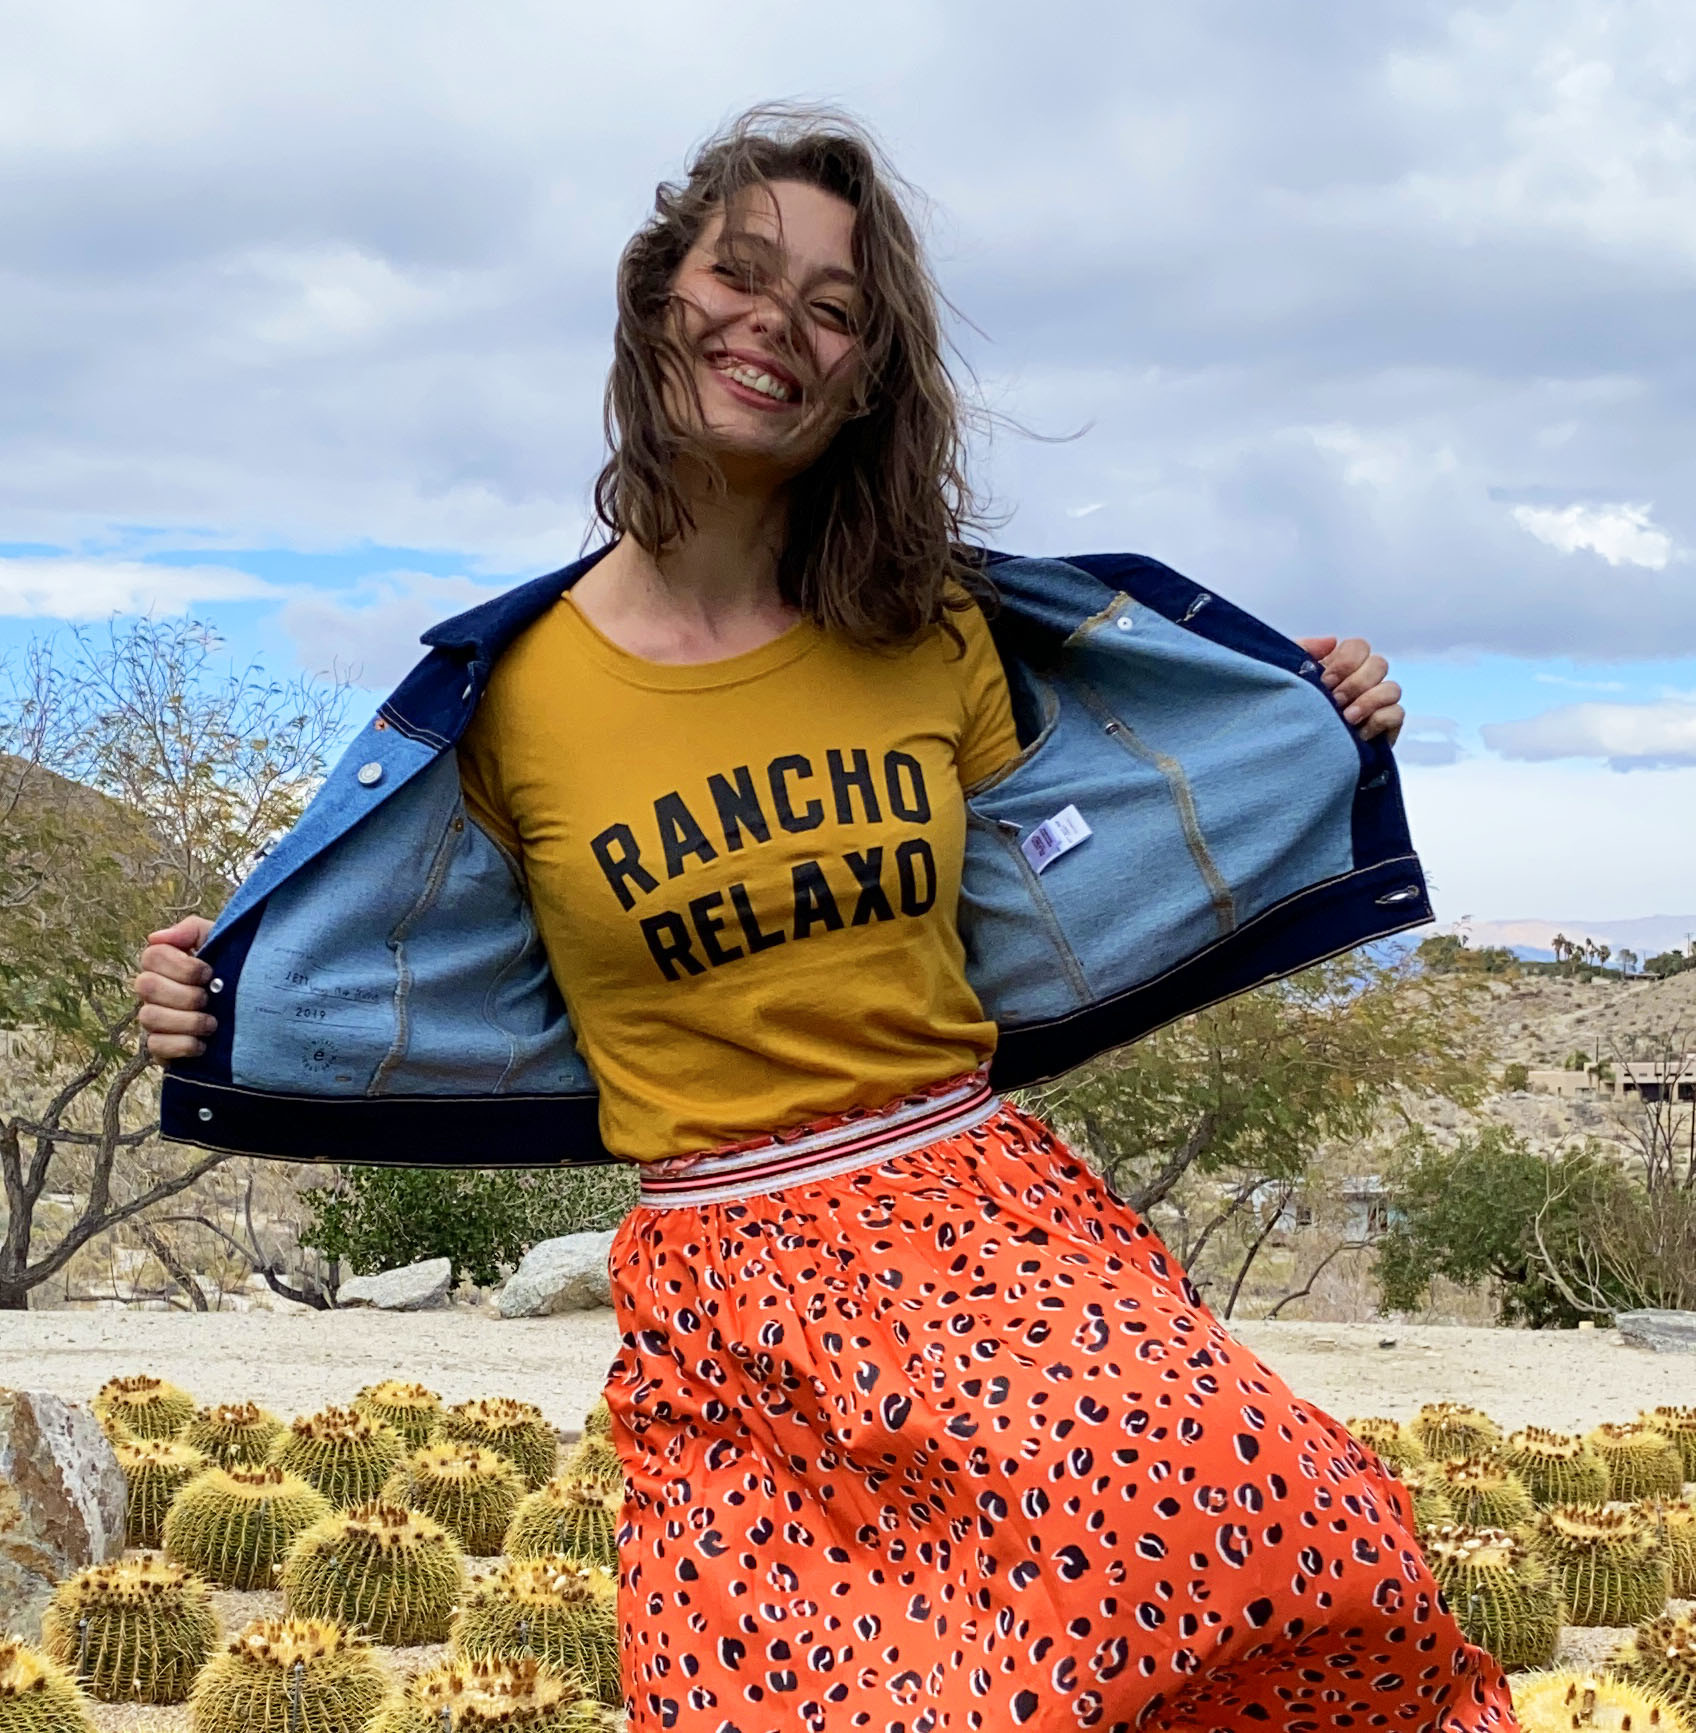 Rancho Relaxo fashion clothing and accessories